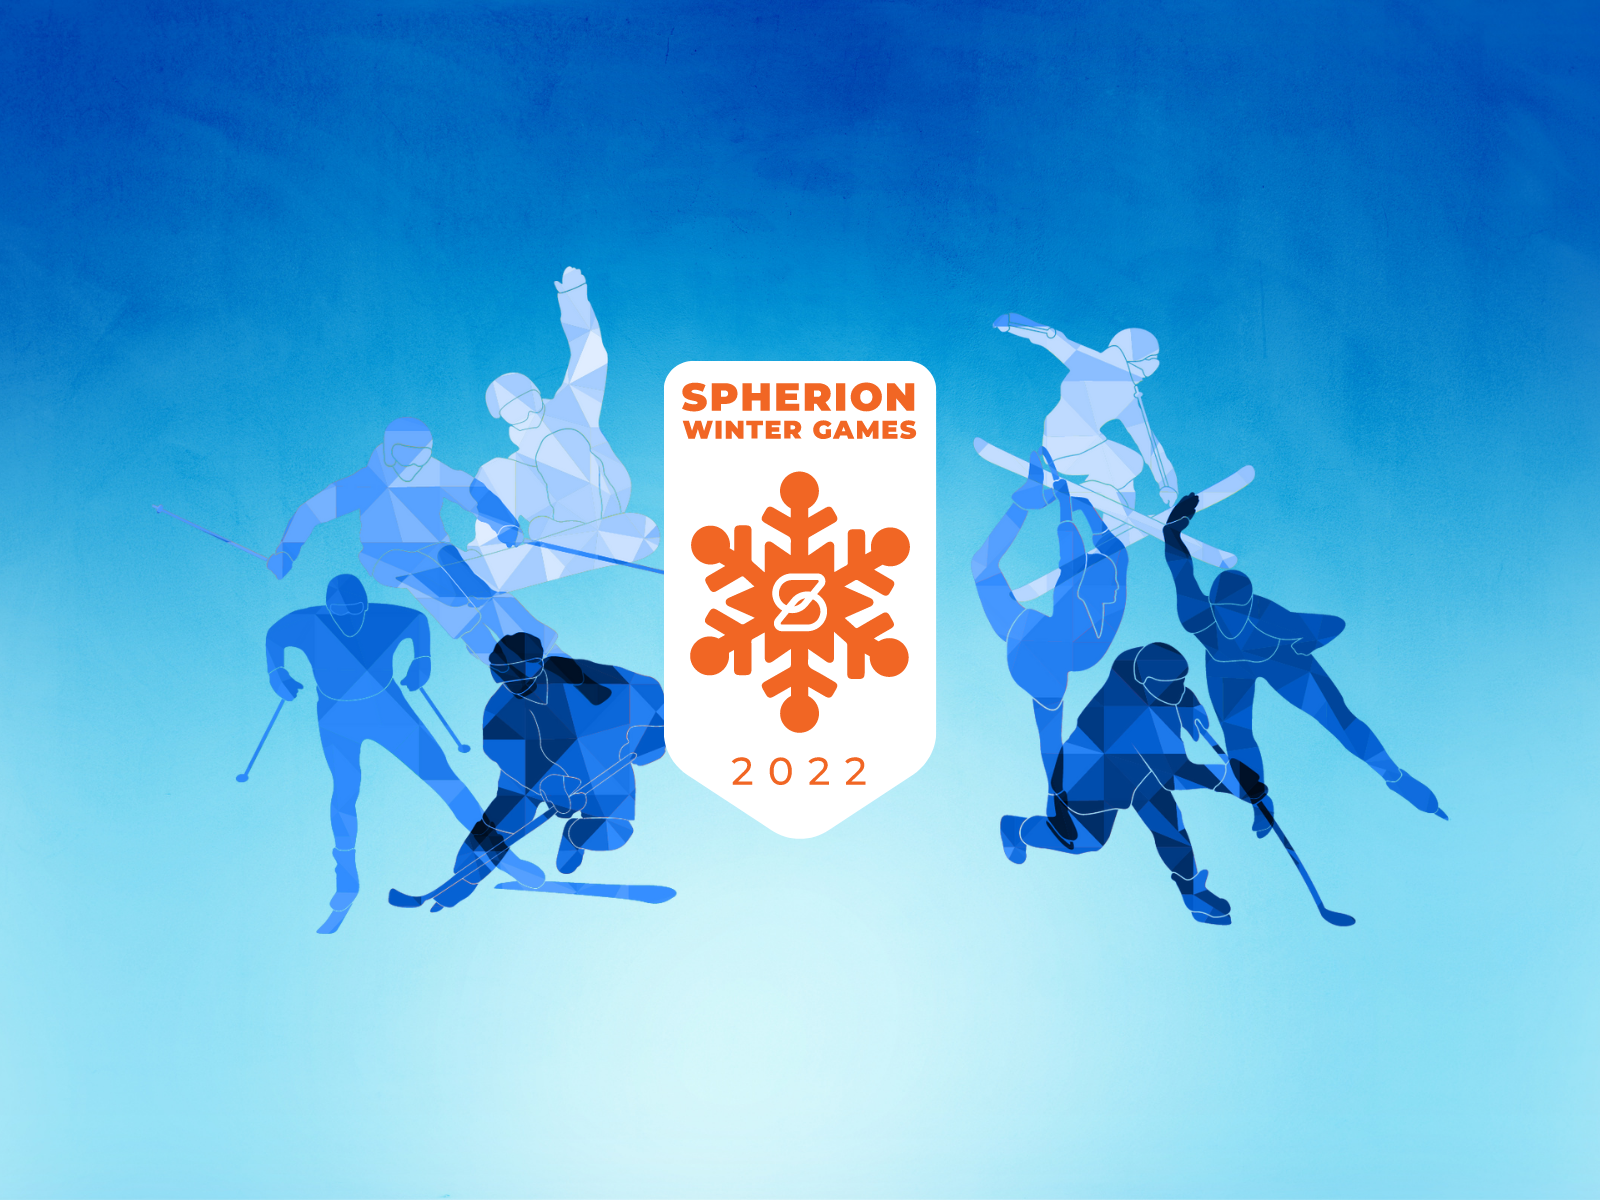 Spherion Winter Games Crest and Sports Figures on a blue background